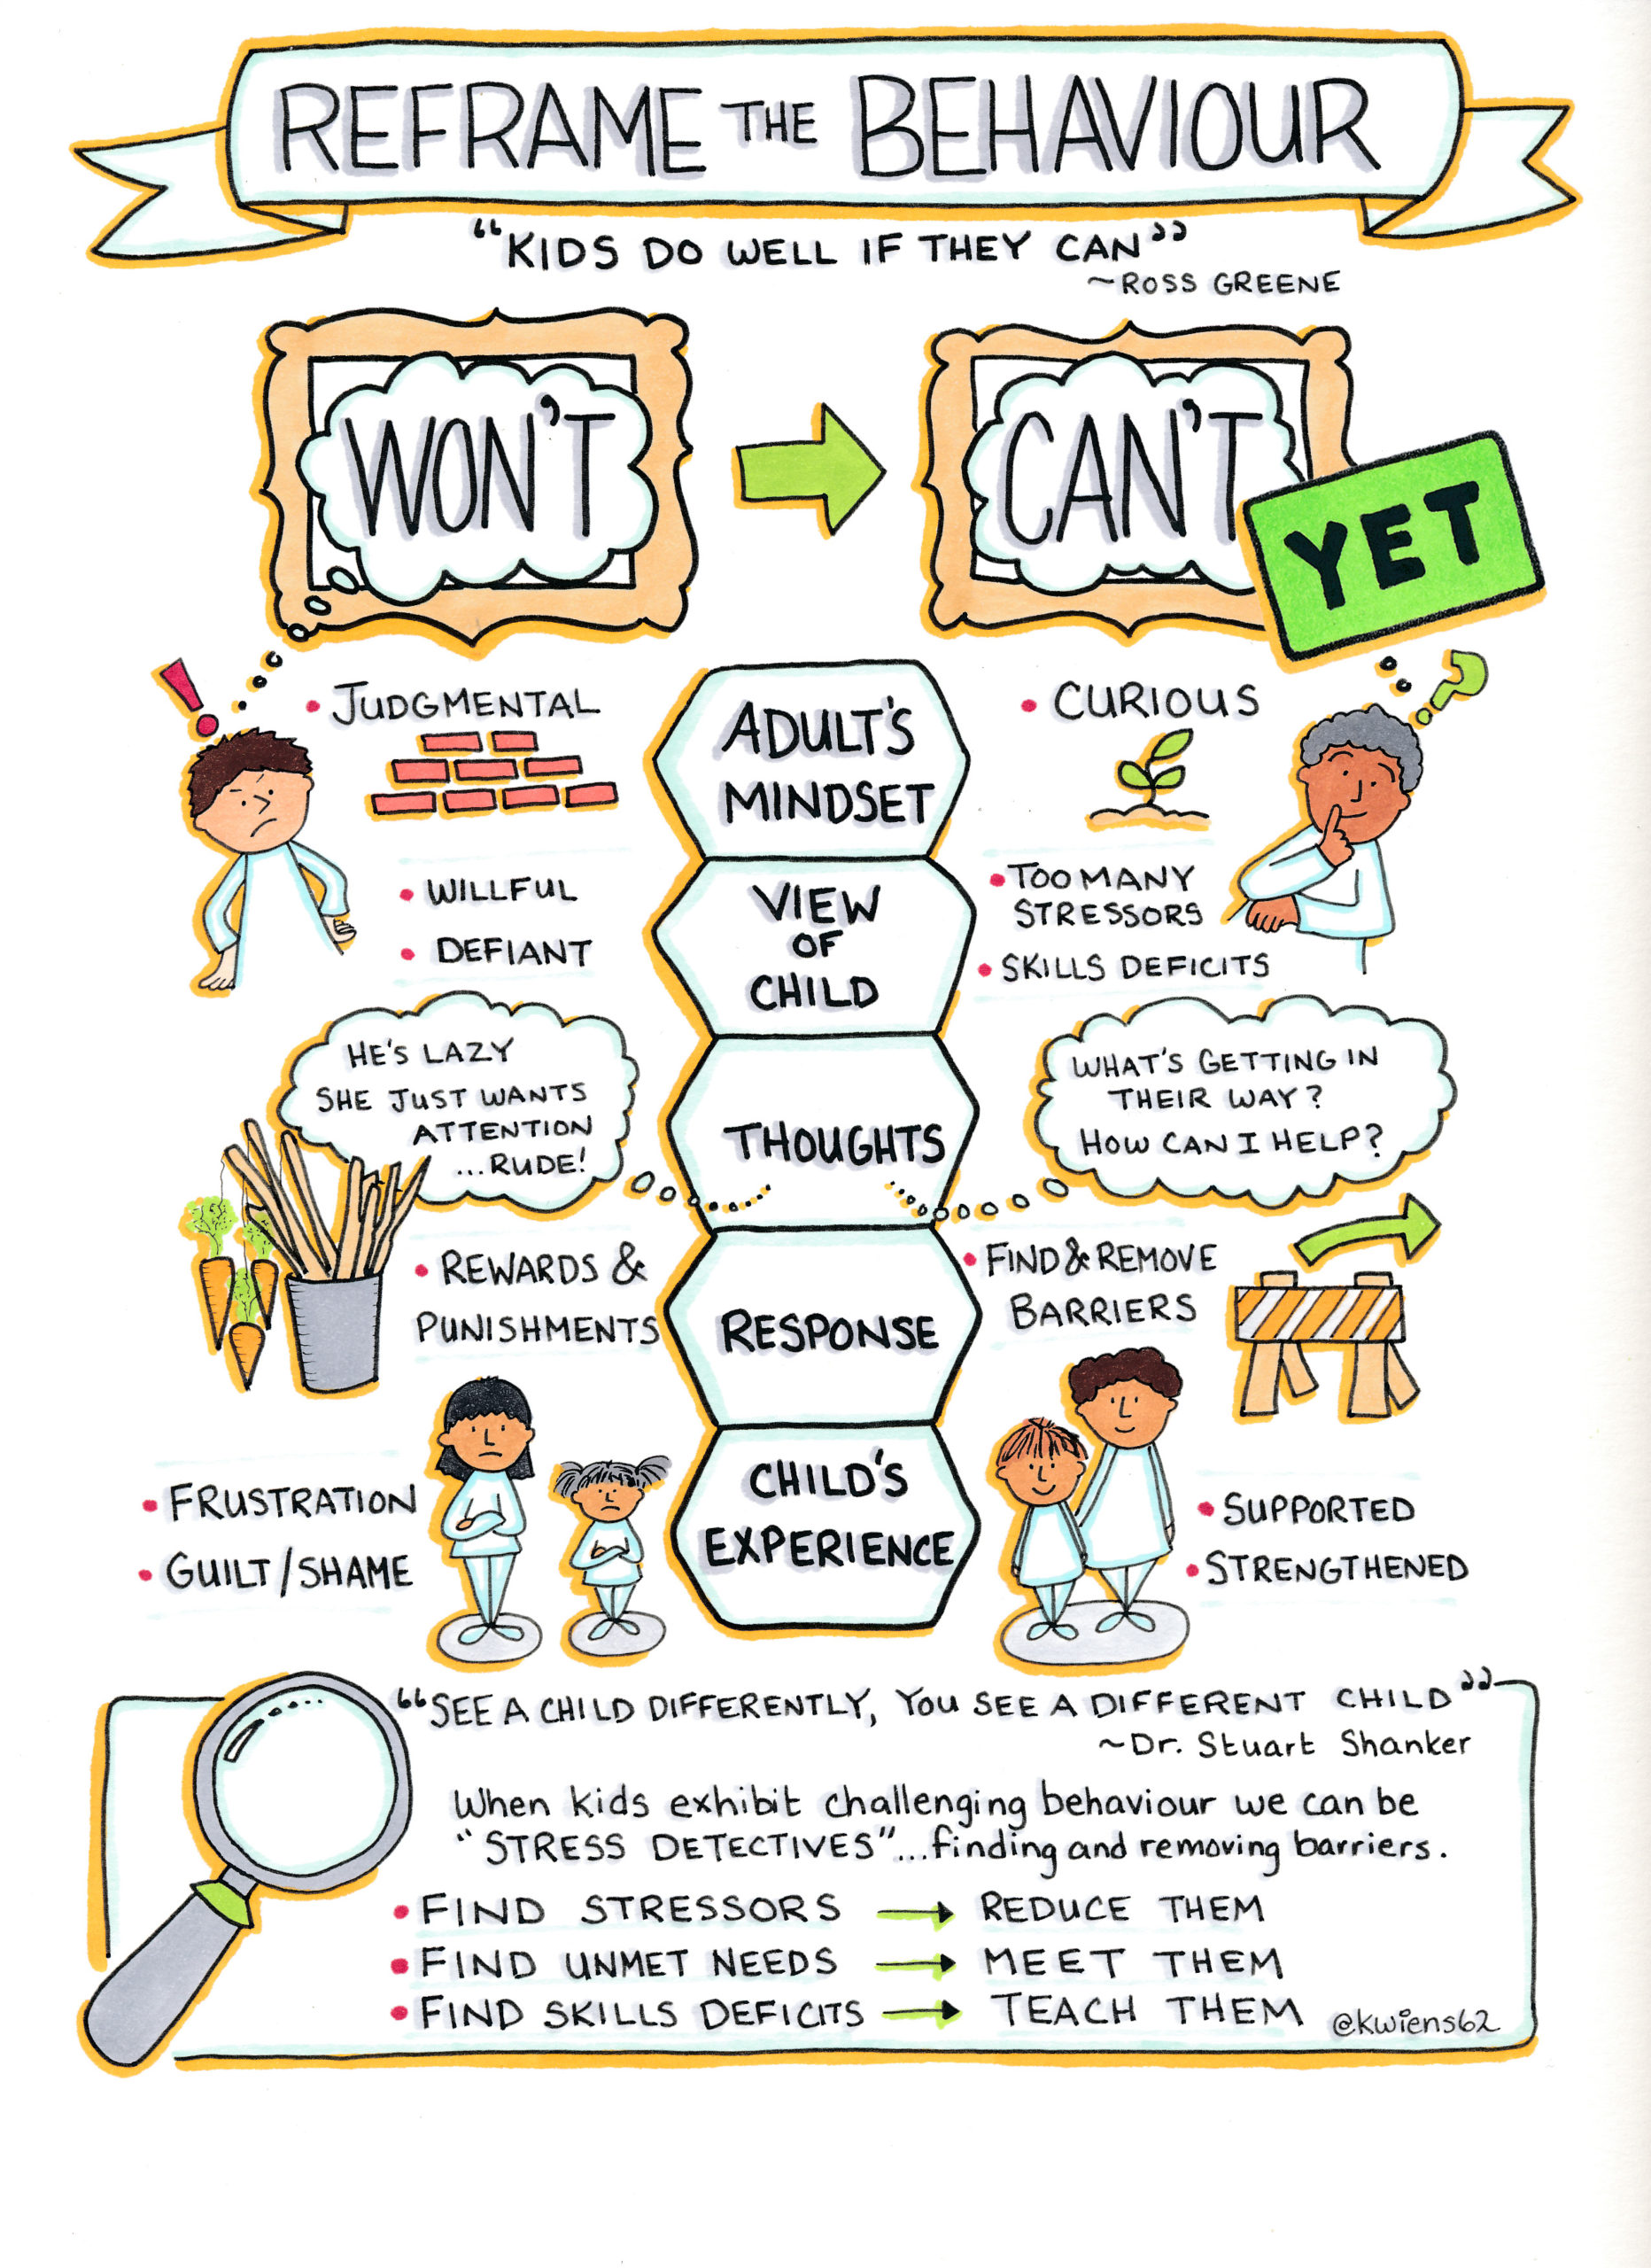 An poster with the title 'reframe the behaviour' which includes the quote 'kids do well if they can'.  It has two columns, headed with the attitudes of "won't" and "can't yet" and then shows how each attitude influences how behaviour is interpreted.